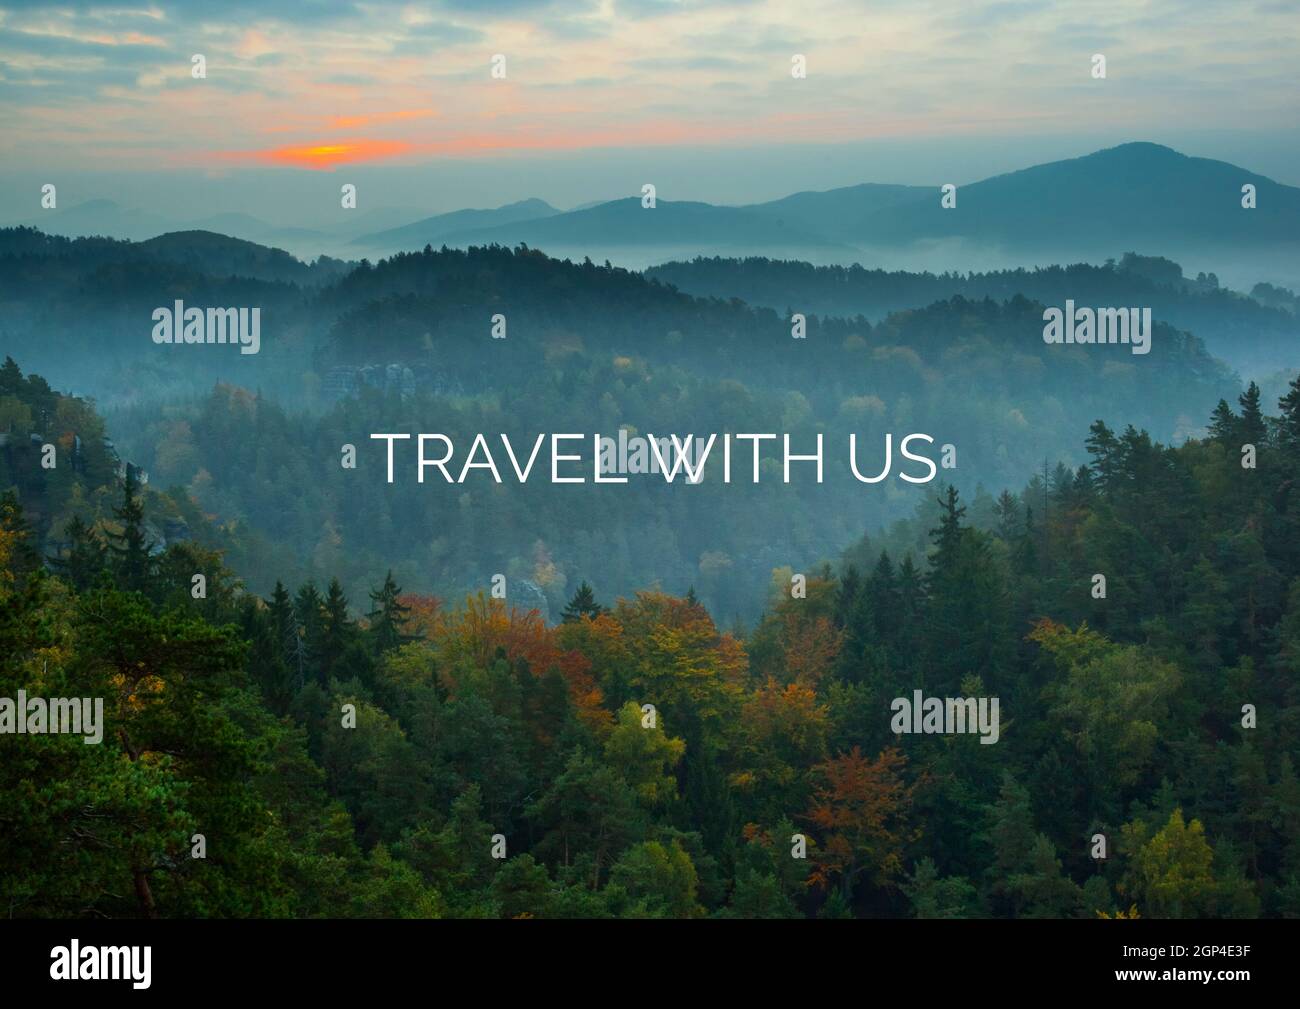 Composition of travel with us text over beautiful landscape in mountains during sunset Stock Photo